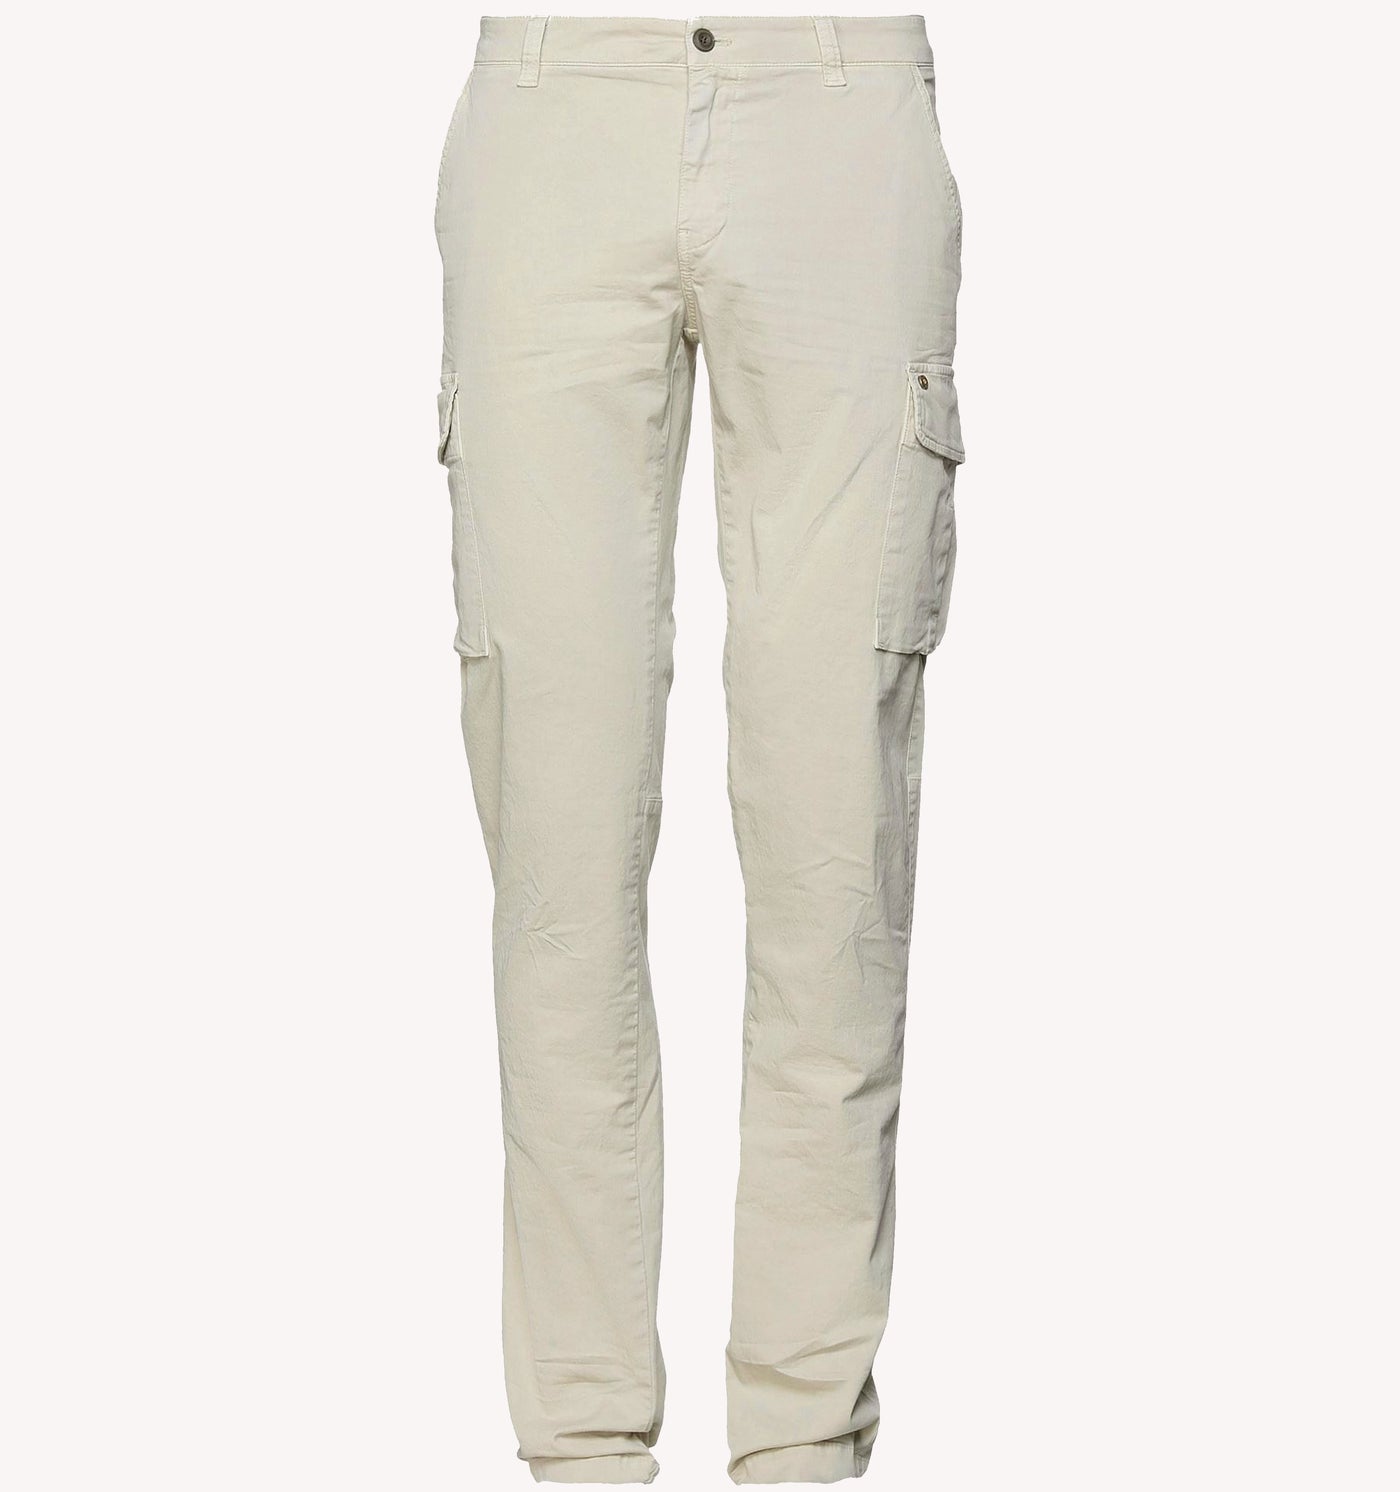 Mason's Chile Cargo Sport Trouser in Oyster